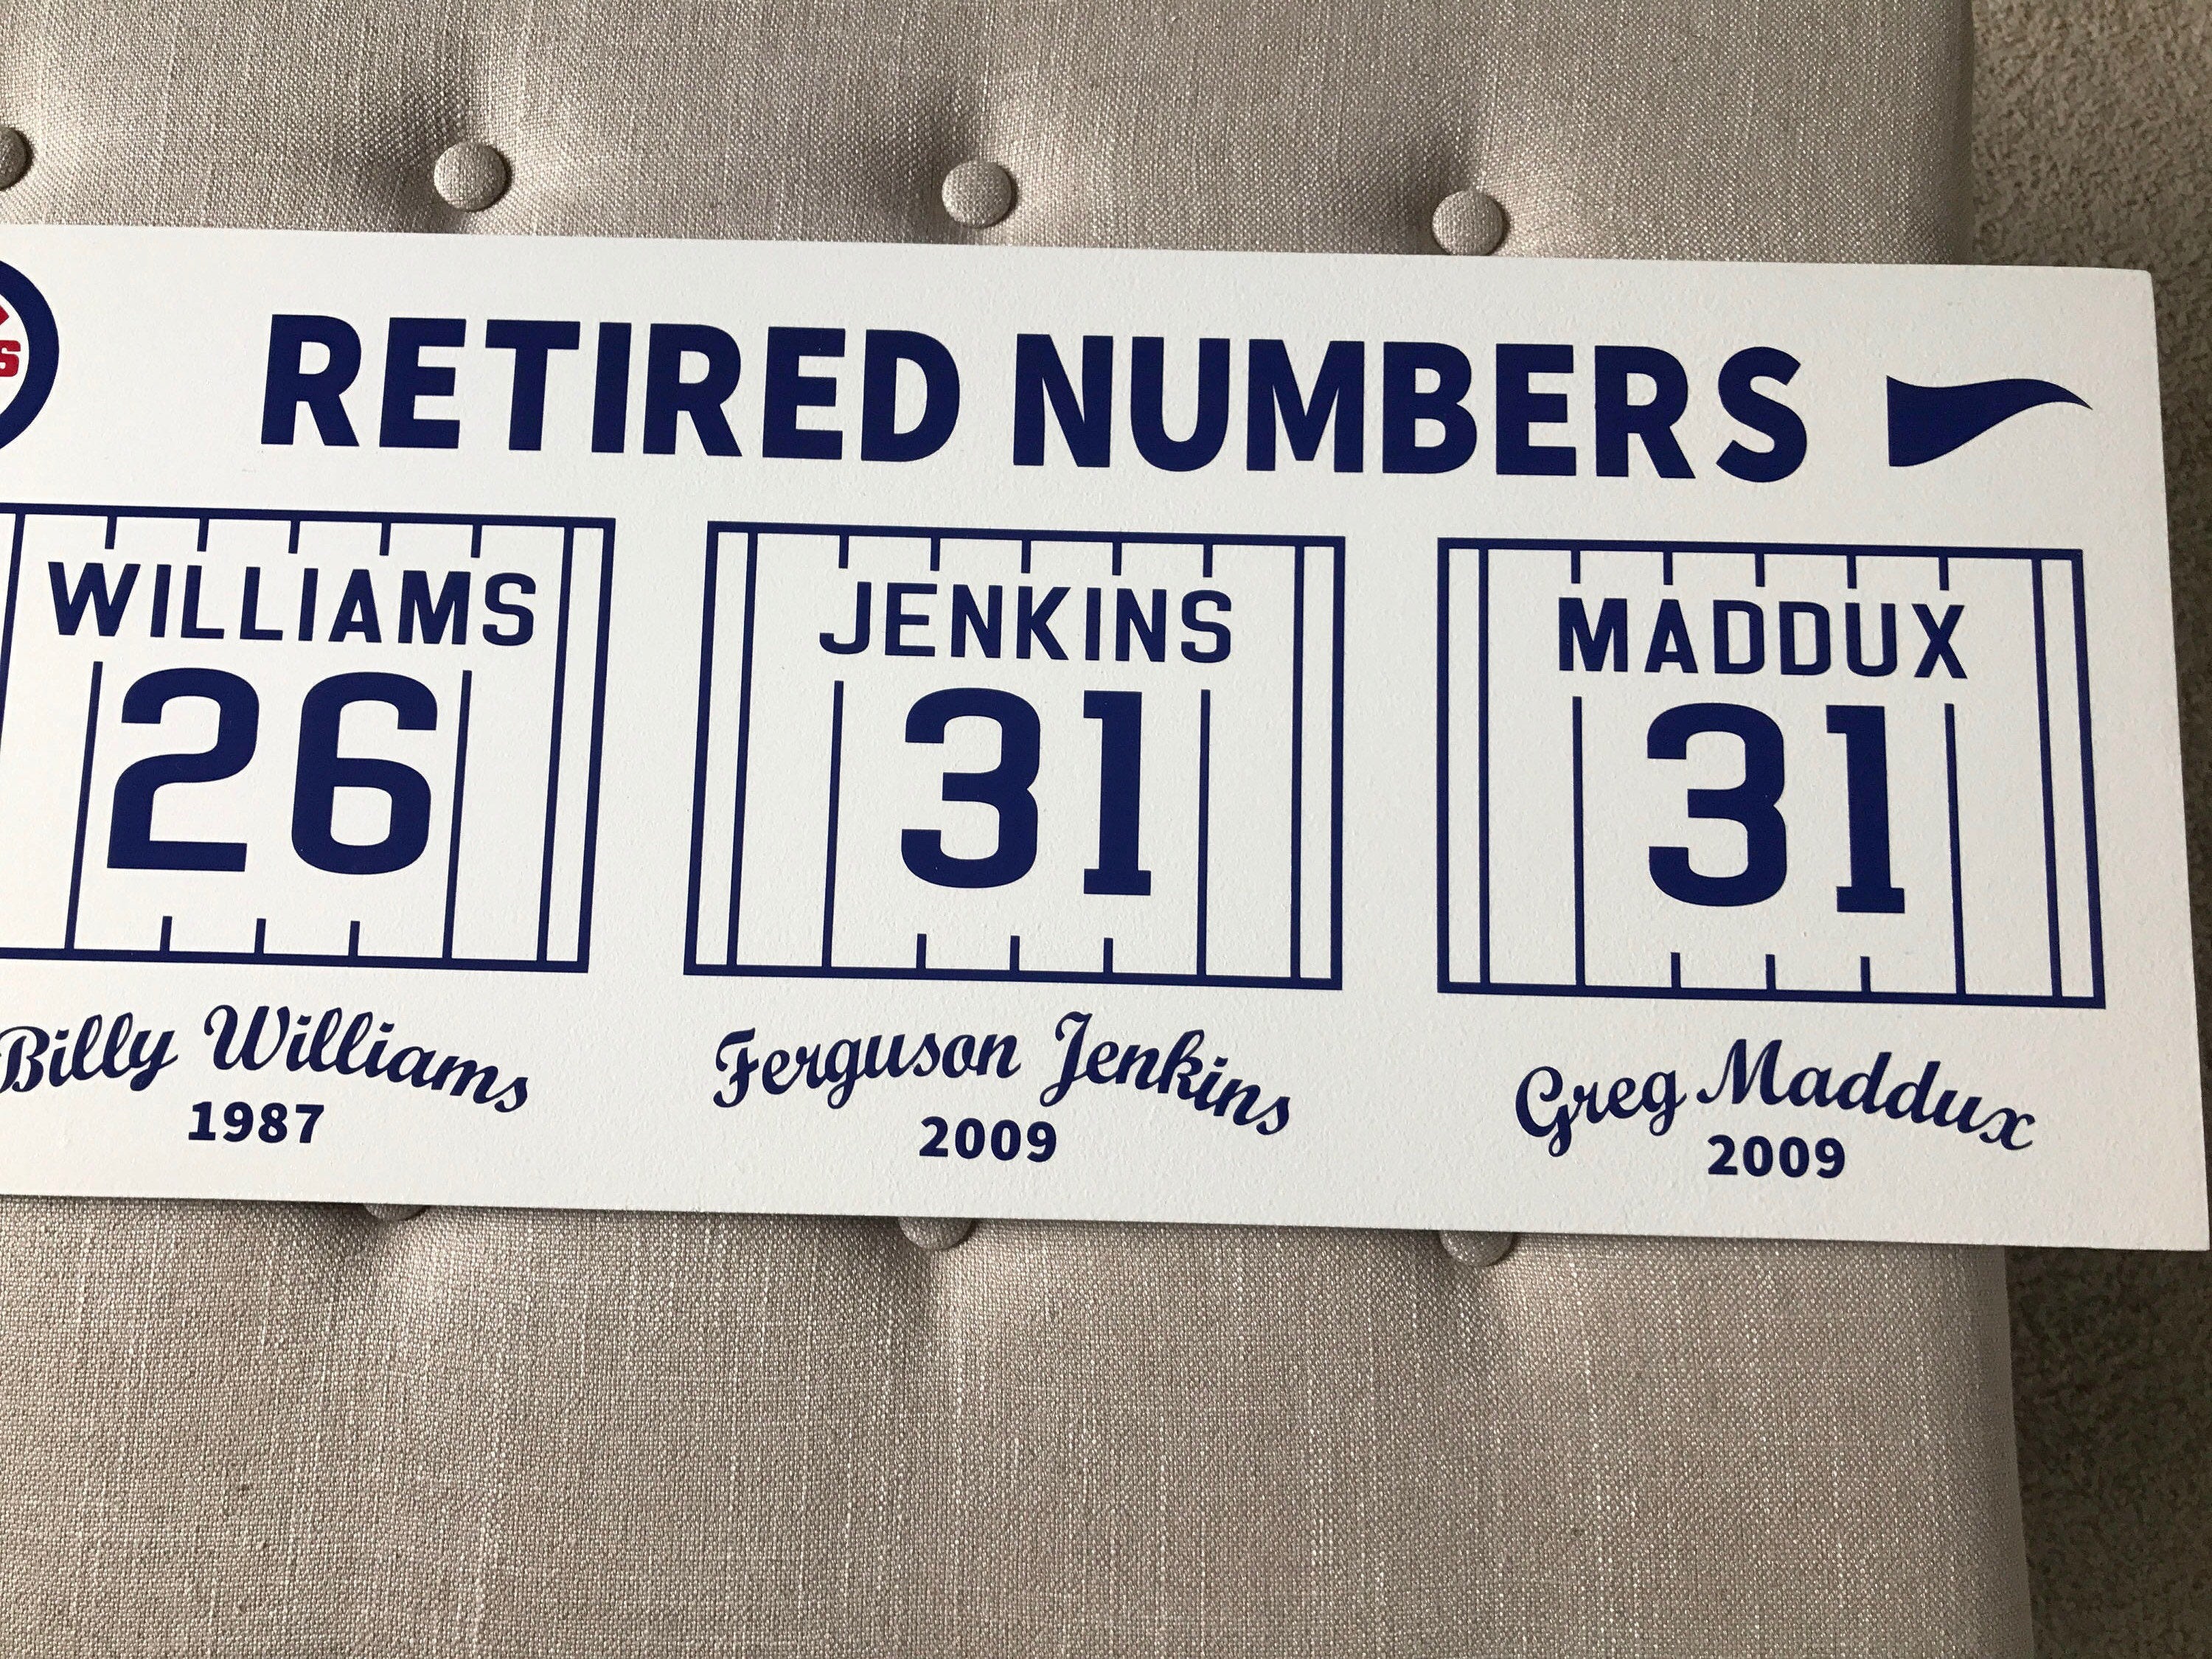 Chicago Cubs - Retired Numbers Sign – 1000 Directions